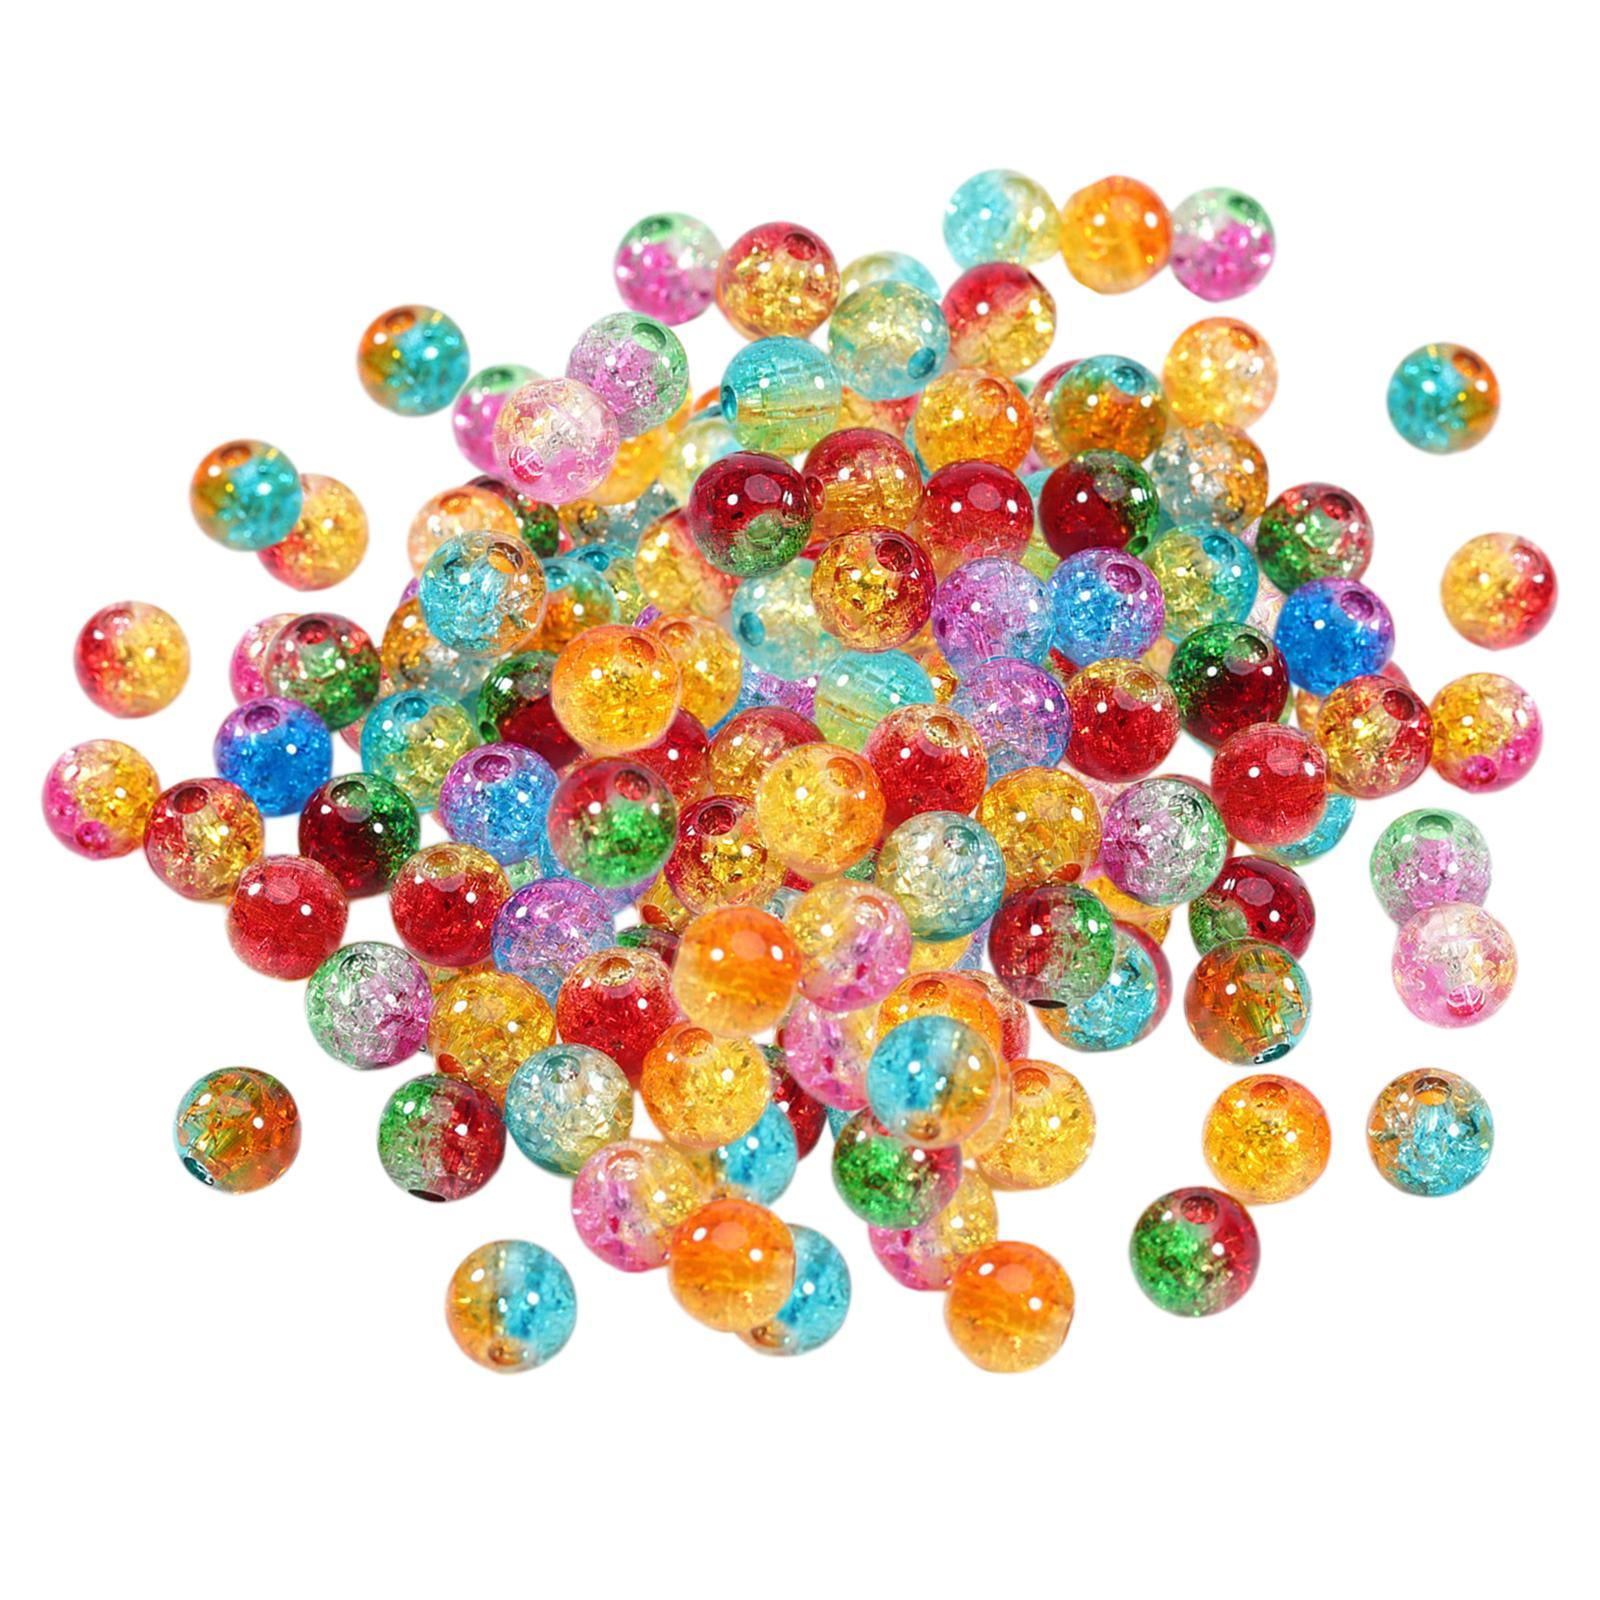 200 Mixed Colour Acrylic Sparkling Silver Dots Round Beads 8mm Jewelry Making 